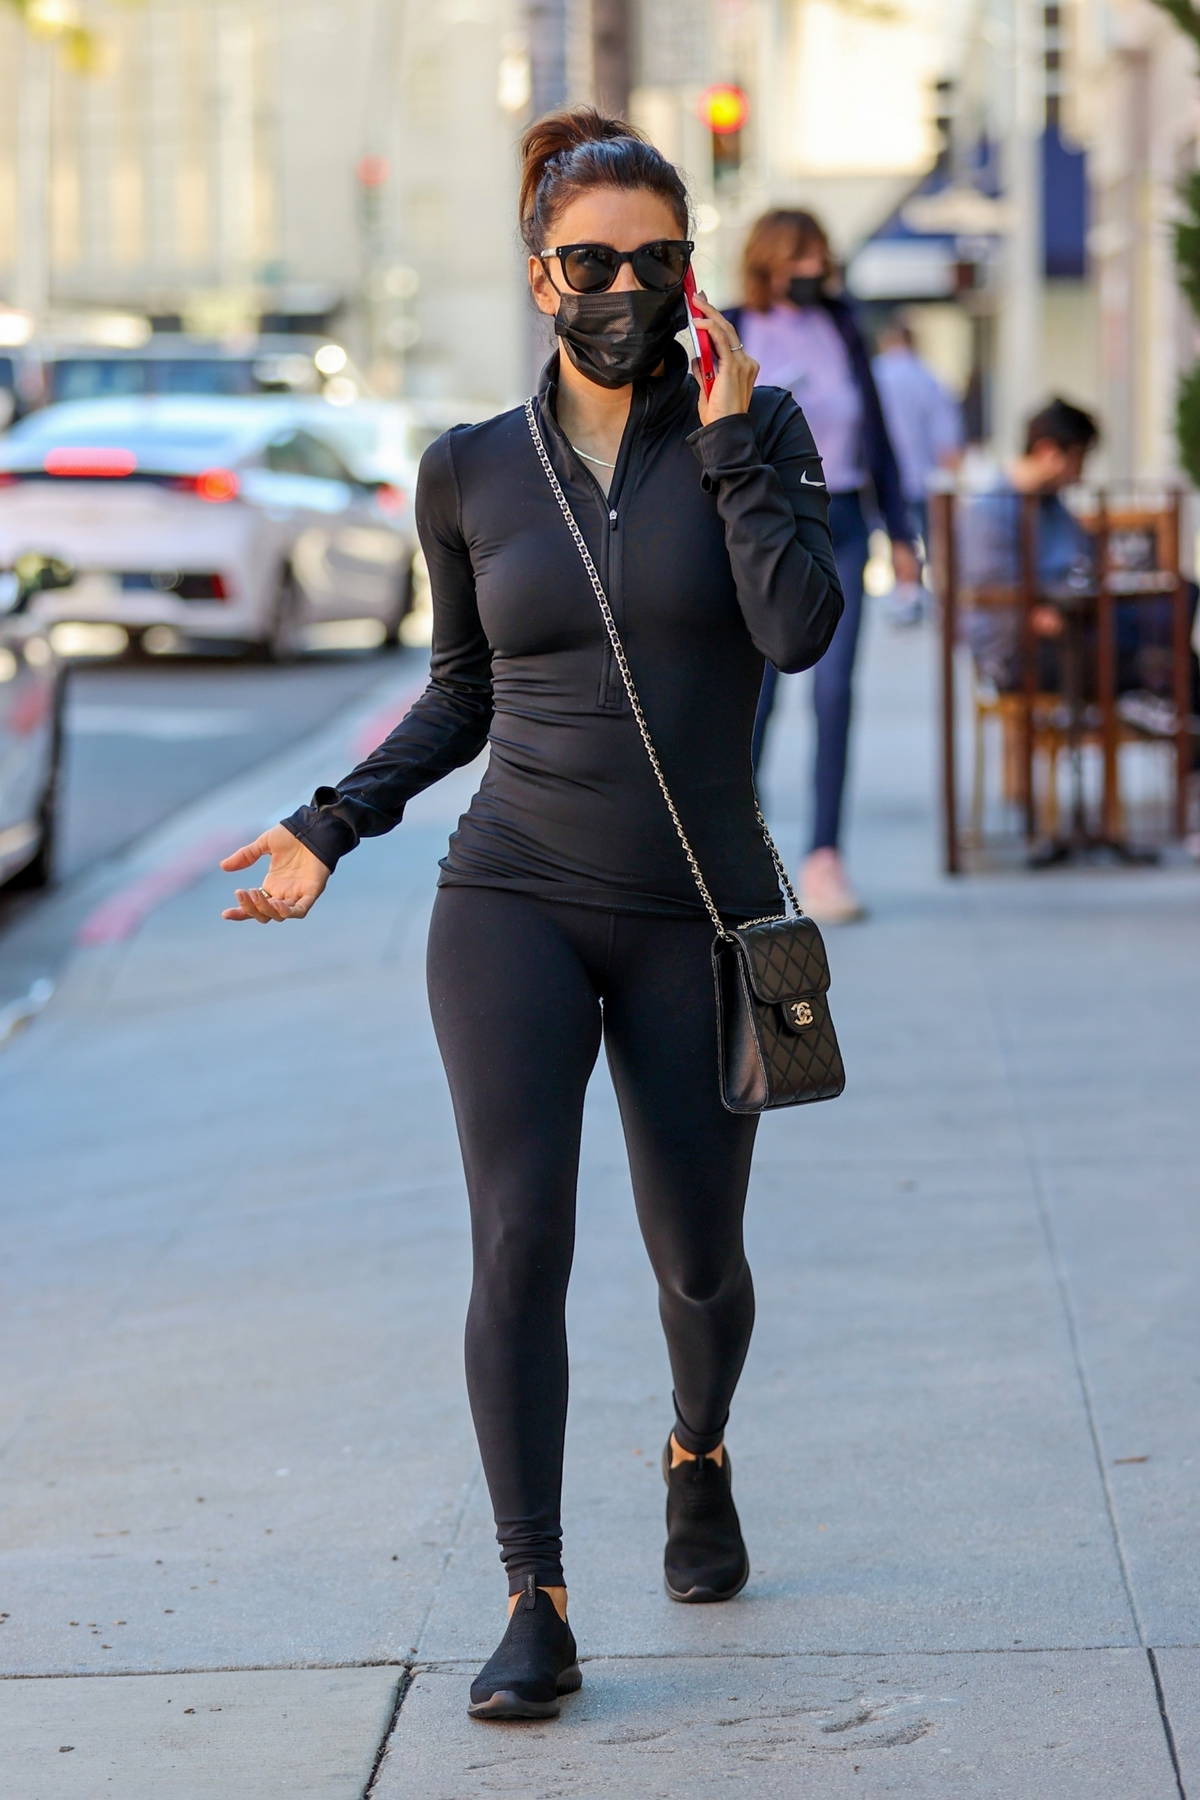 Eva Longoria sports a form-fitting black top with leggings while